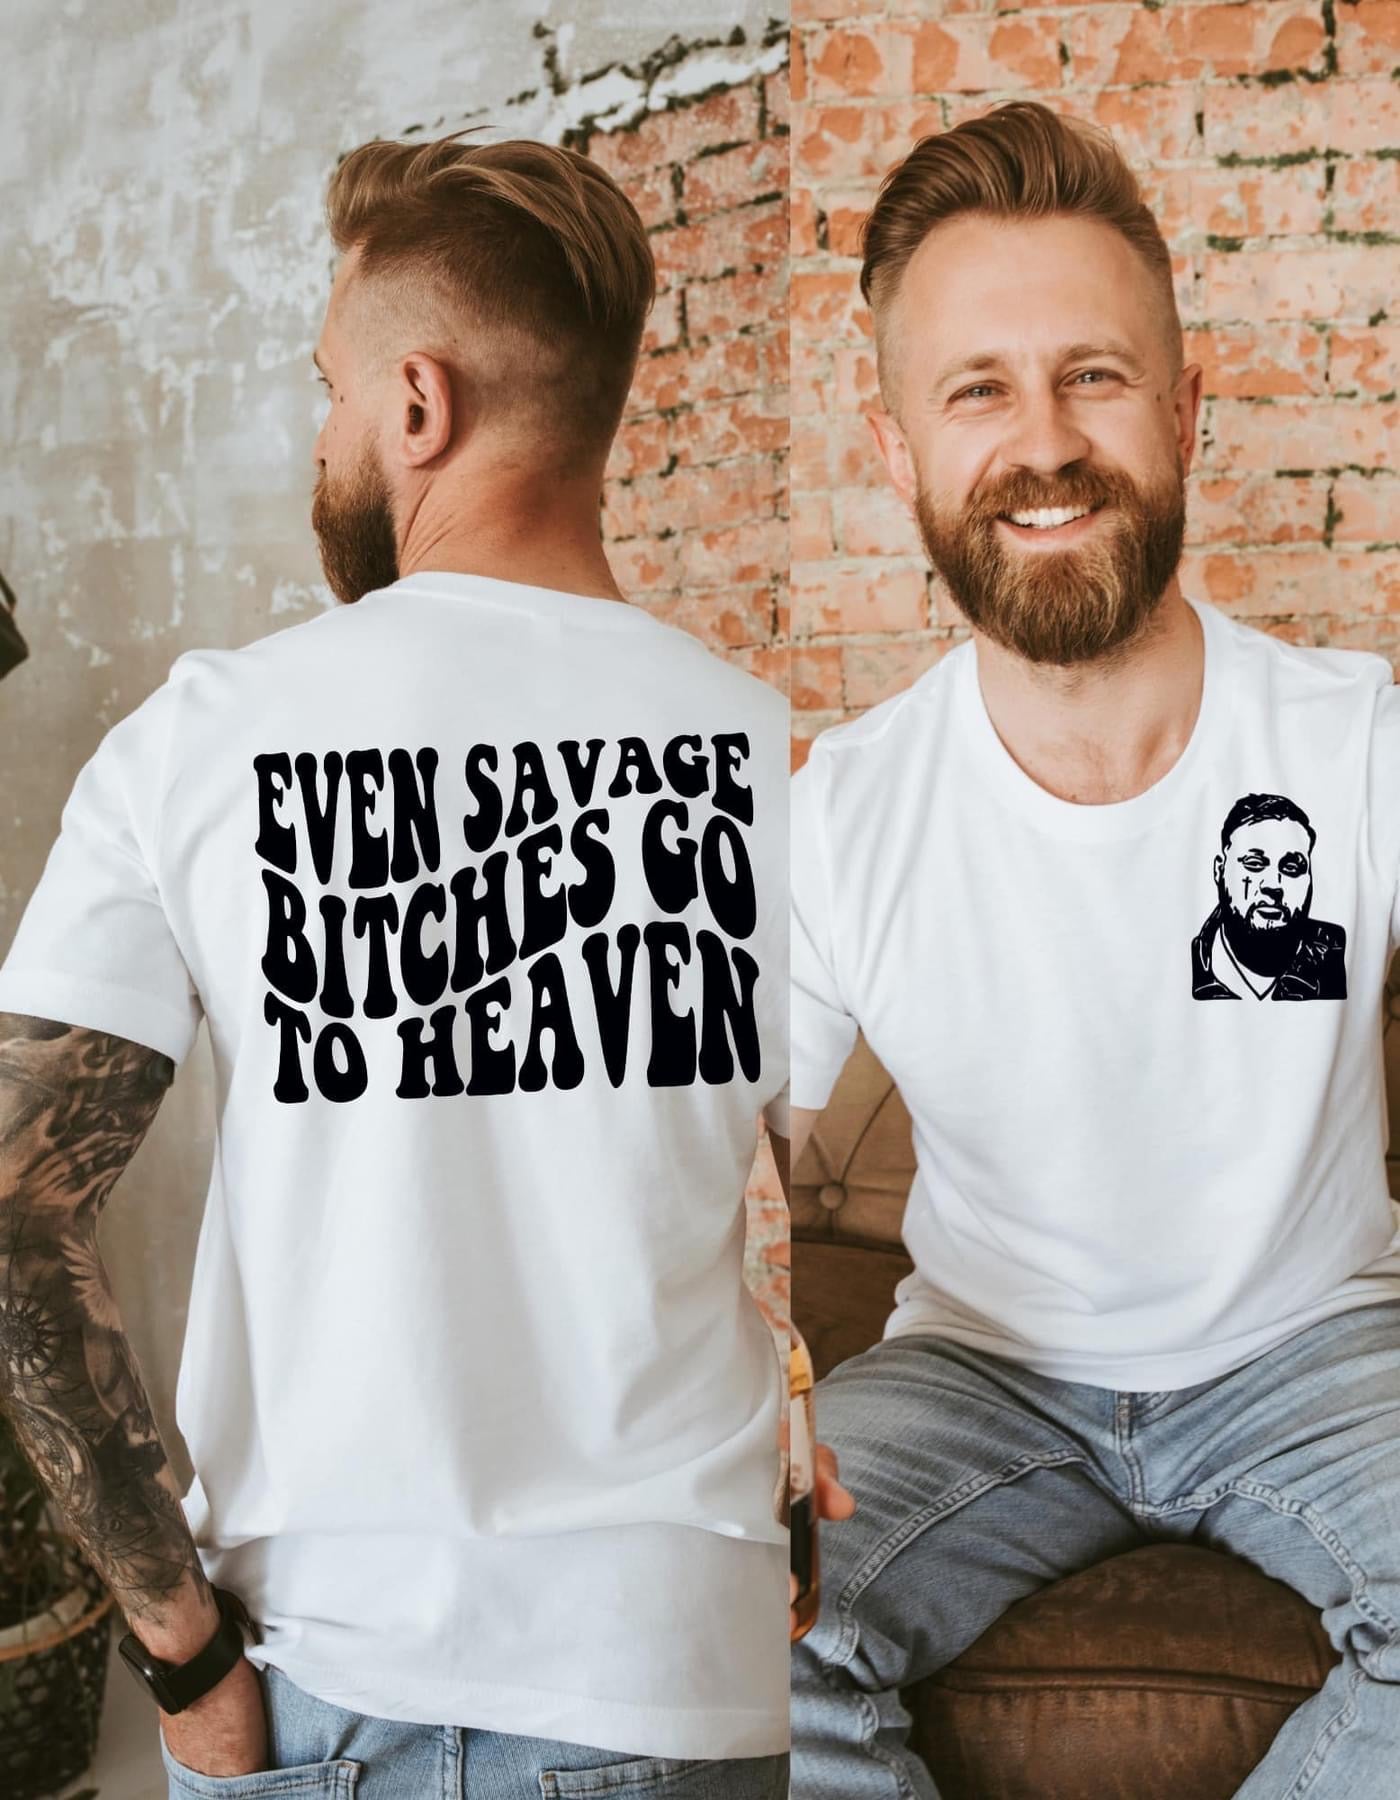 EVEN SAVAGE BITCHES GO TO HEAVEN